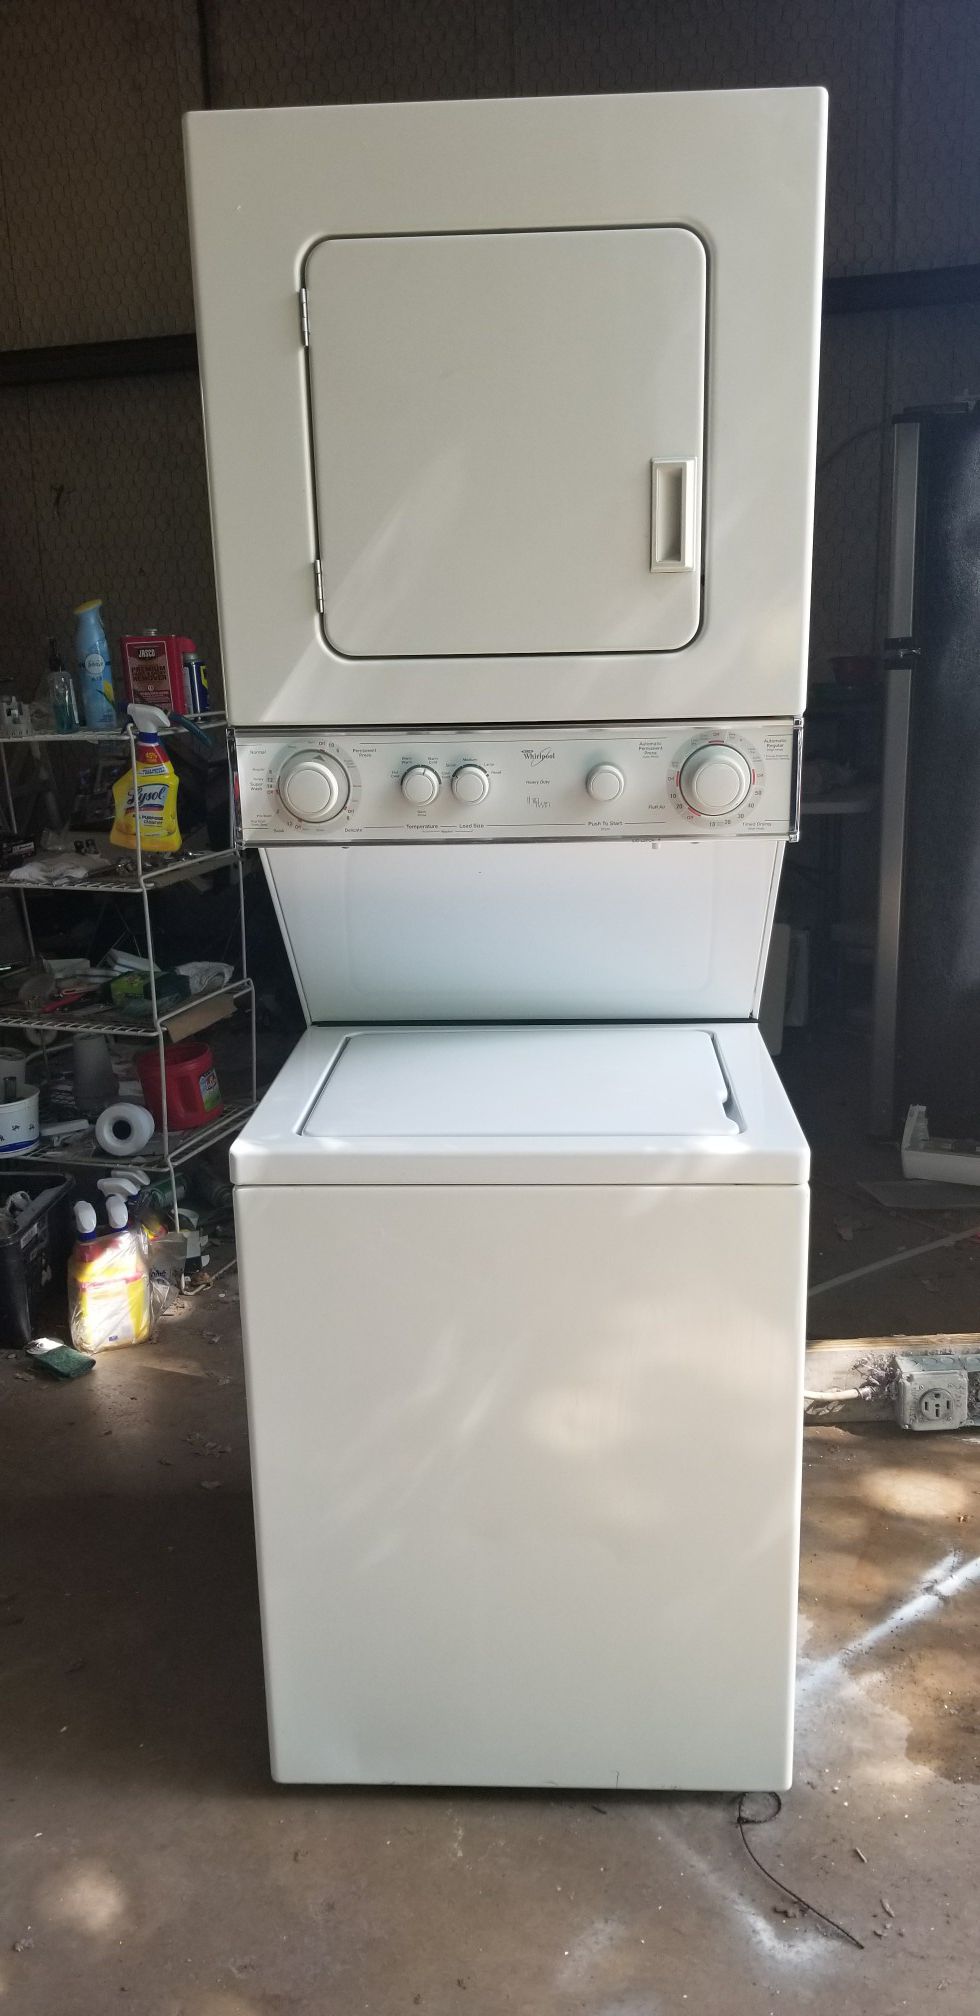 Whirlpool 24" stackable washer n dryer combo